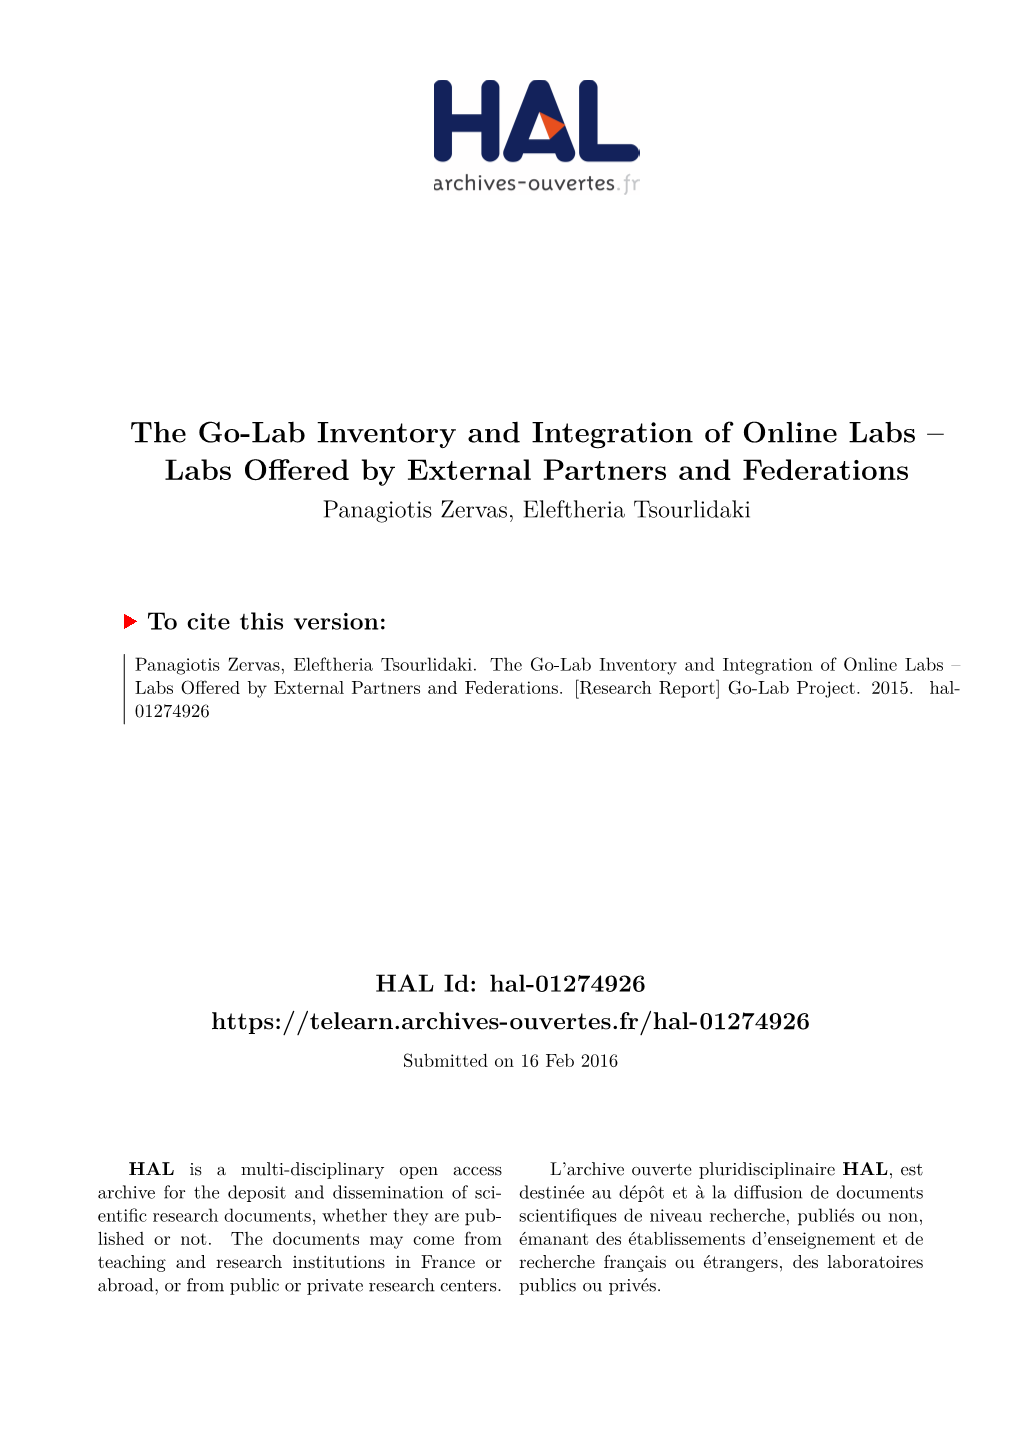 The Go-Lab Inventory and Integration of Online Labs – Labs Offered by External Partners and Federations Panagiotis Zervas, Eleftheria Tsourlidaki